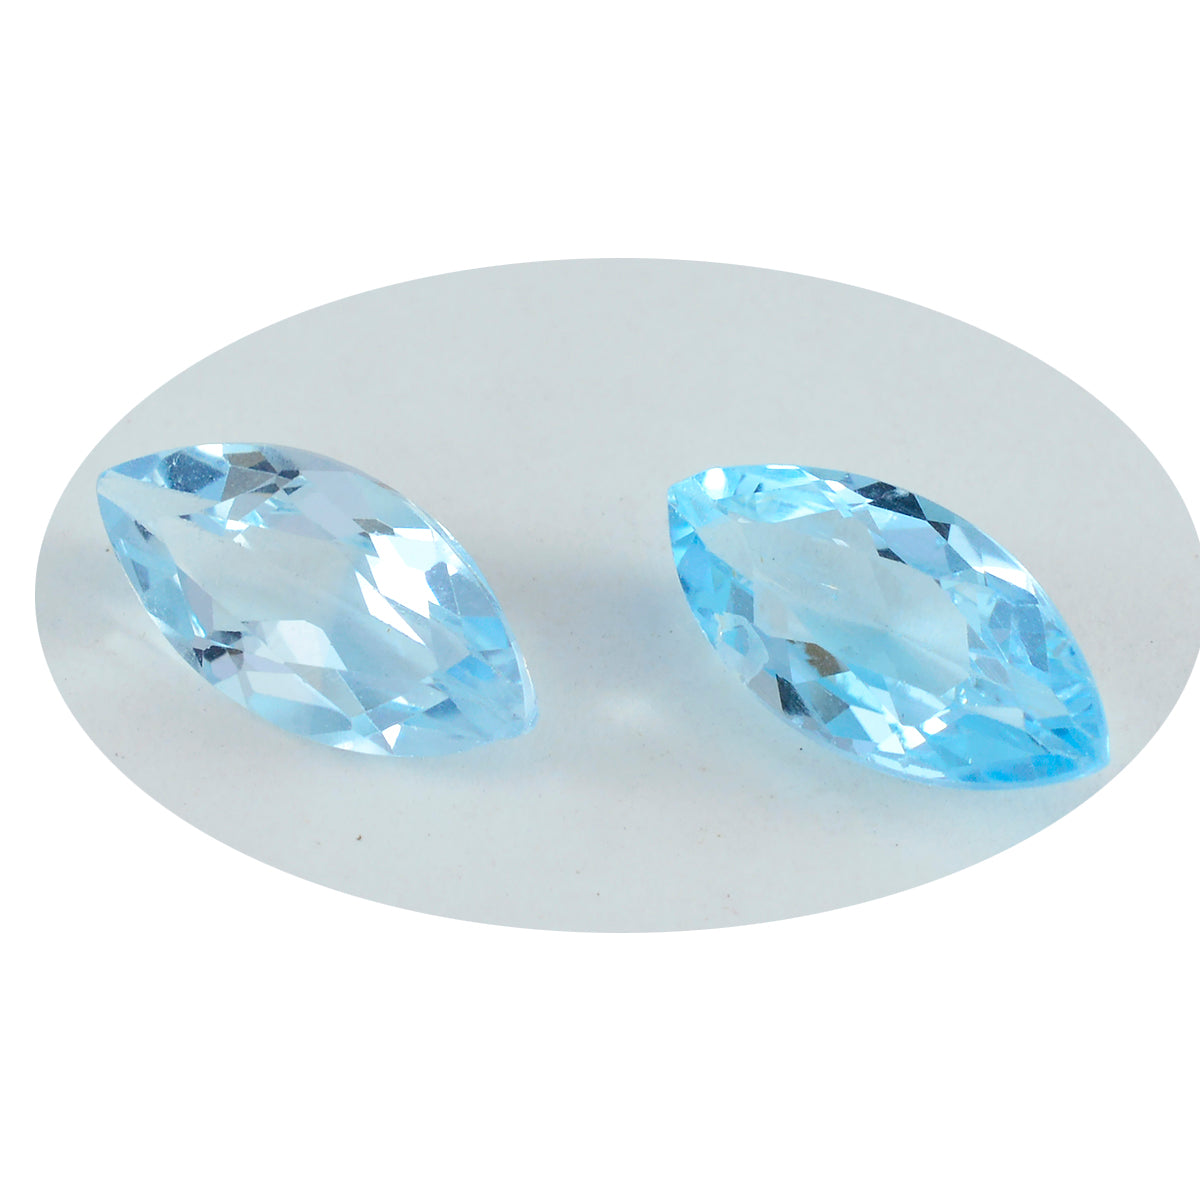 Riyogems 1PC Real Blue Topaz Faceted 9x18 mm Marquise Shape A Quality Loose Stone